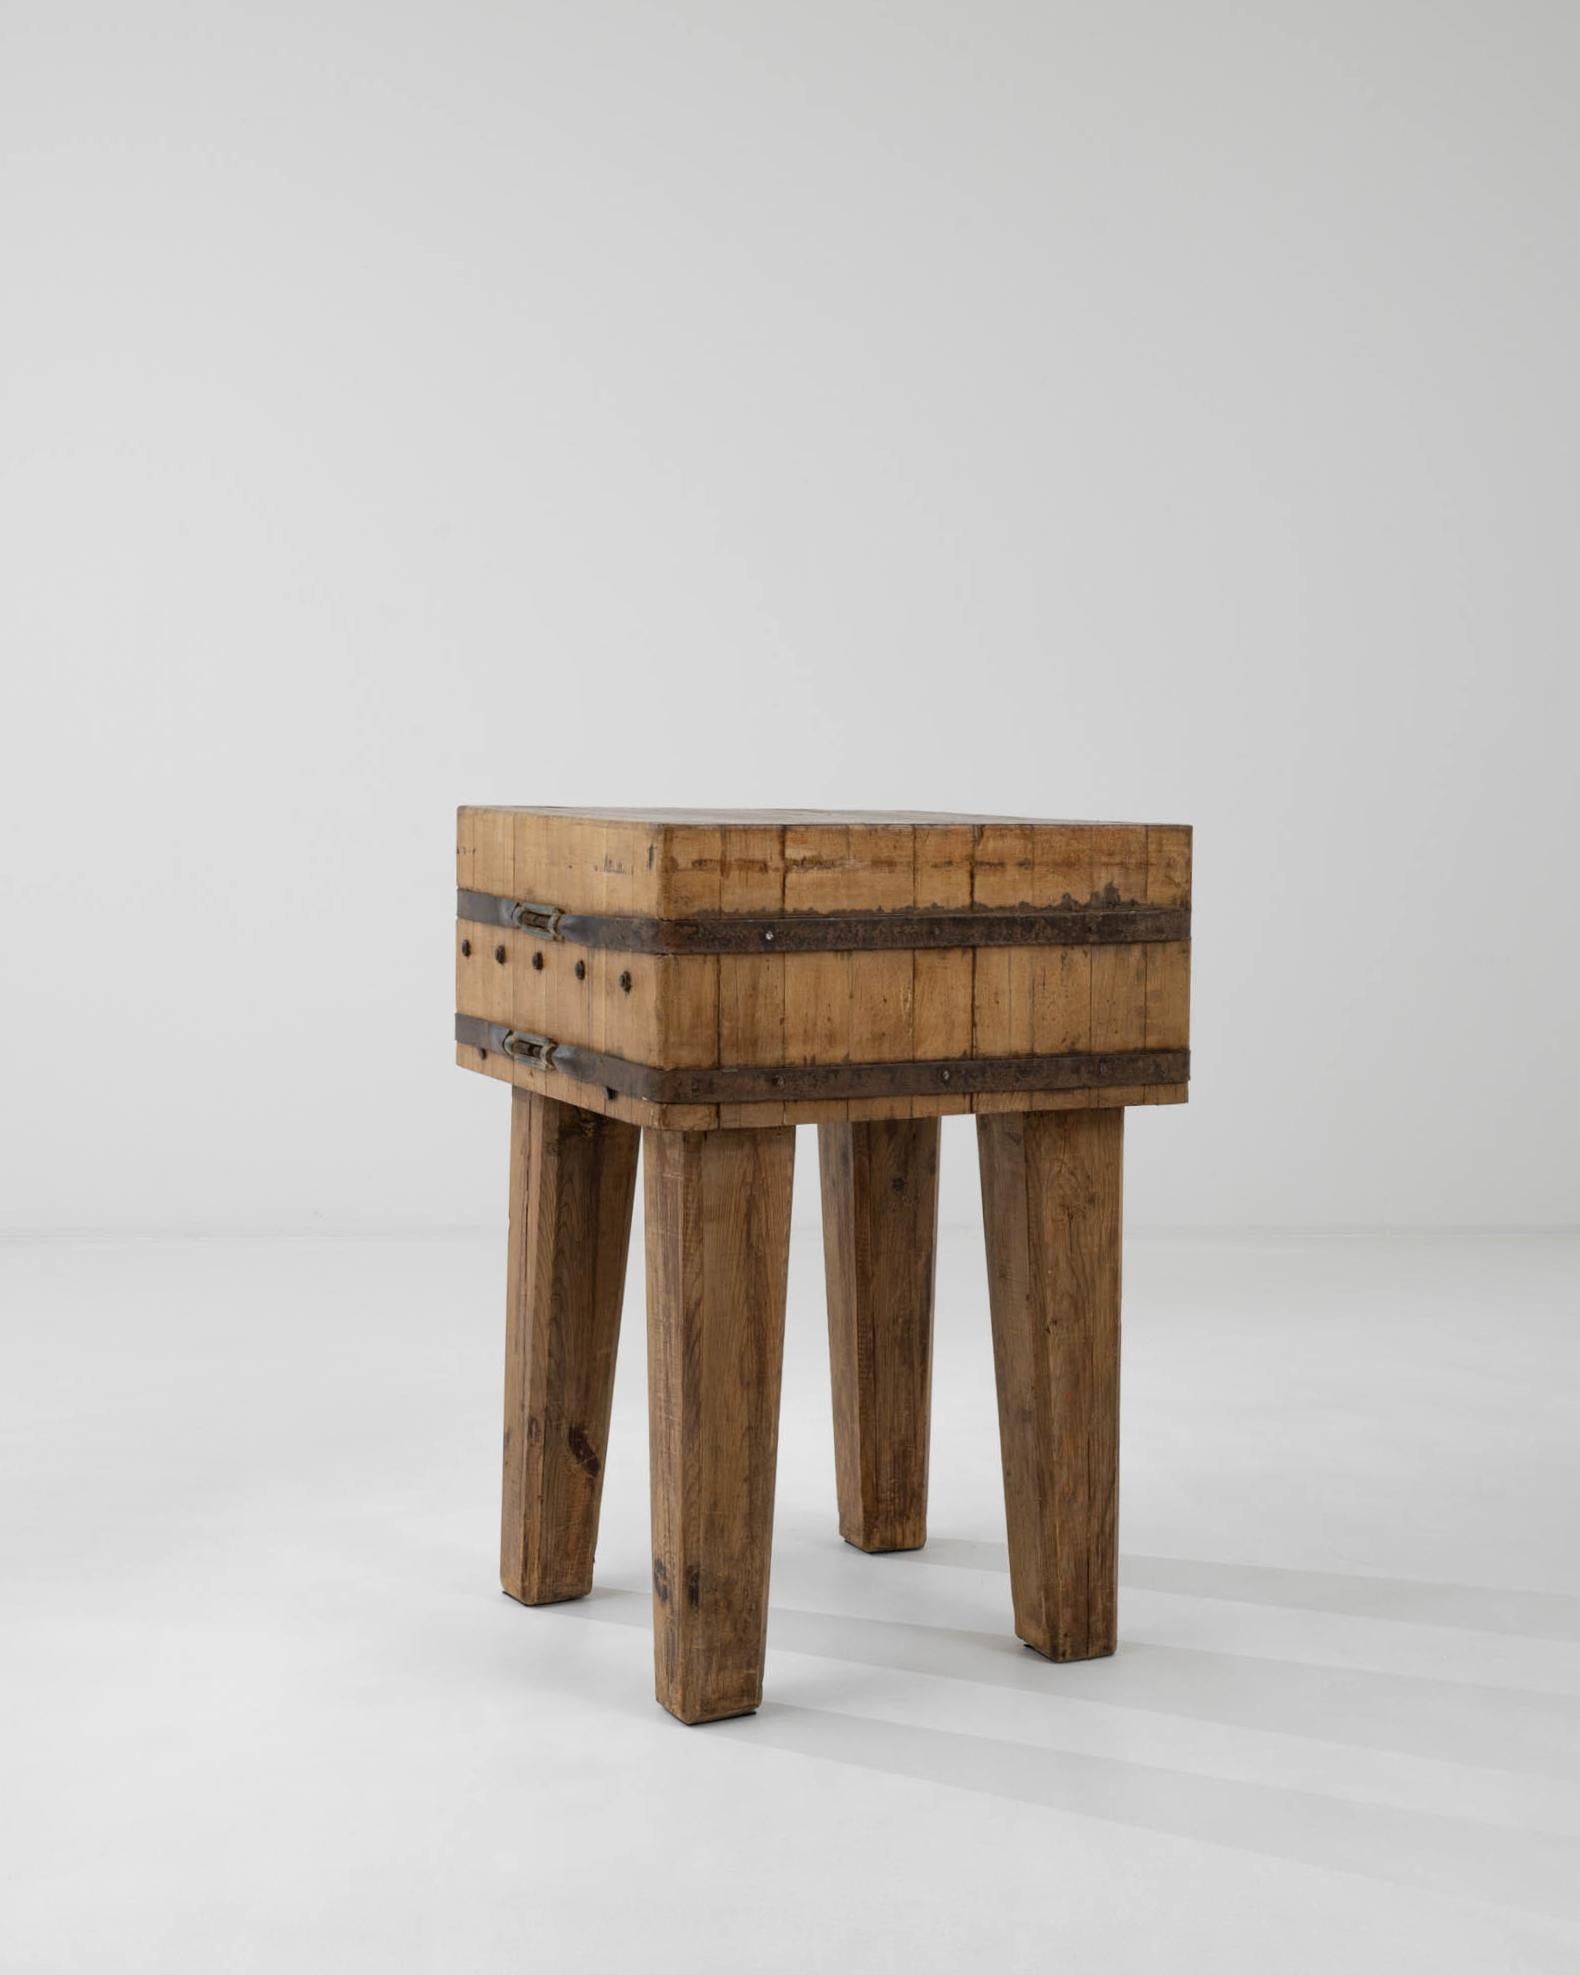 Raw wood, in combination with rustic metal elements, accentuates the brutalist spirit of this vintage work table, made in Central Europe. The thick top is formed from a block of laminated hardwood, pieces faced with the engrian upwards– a design